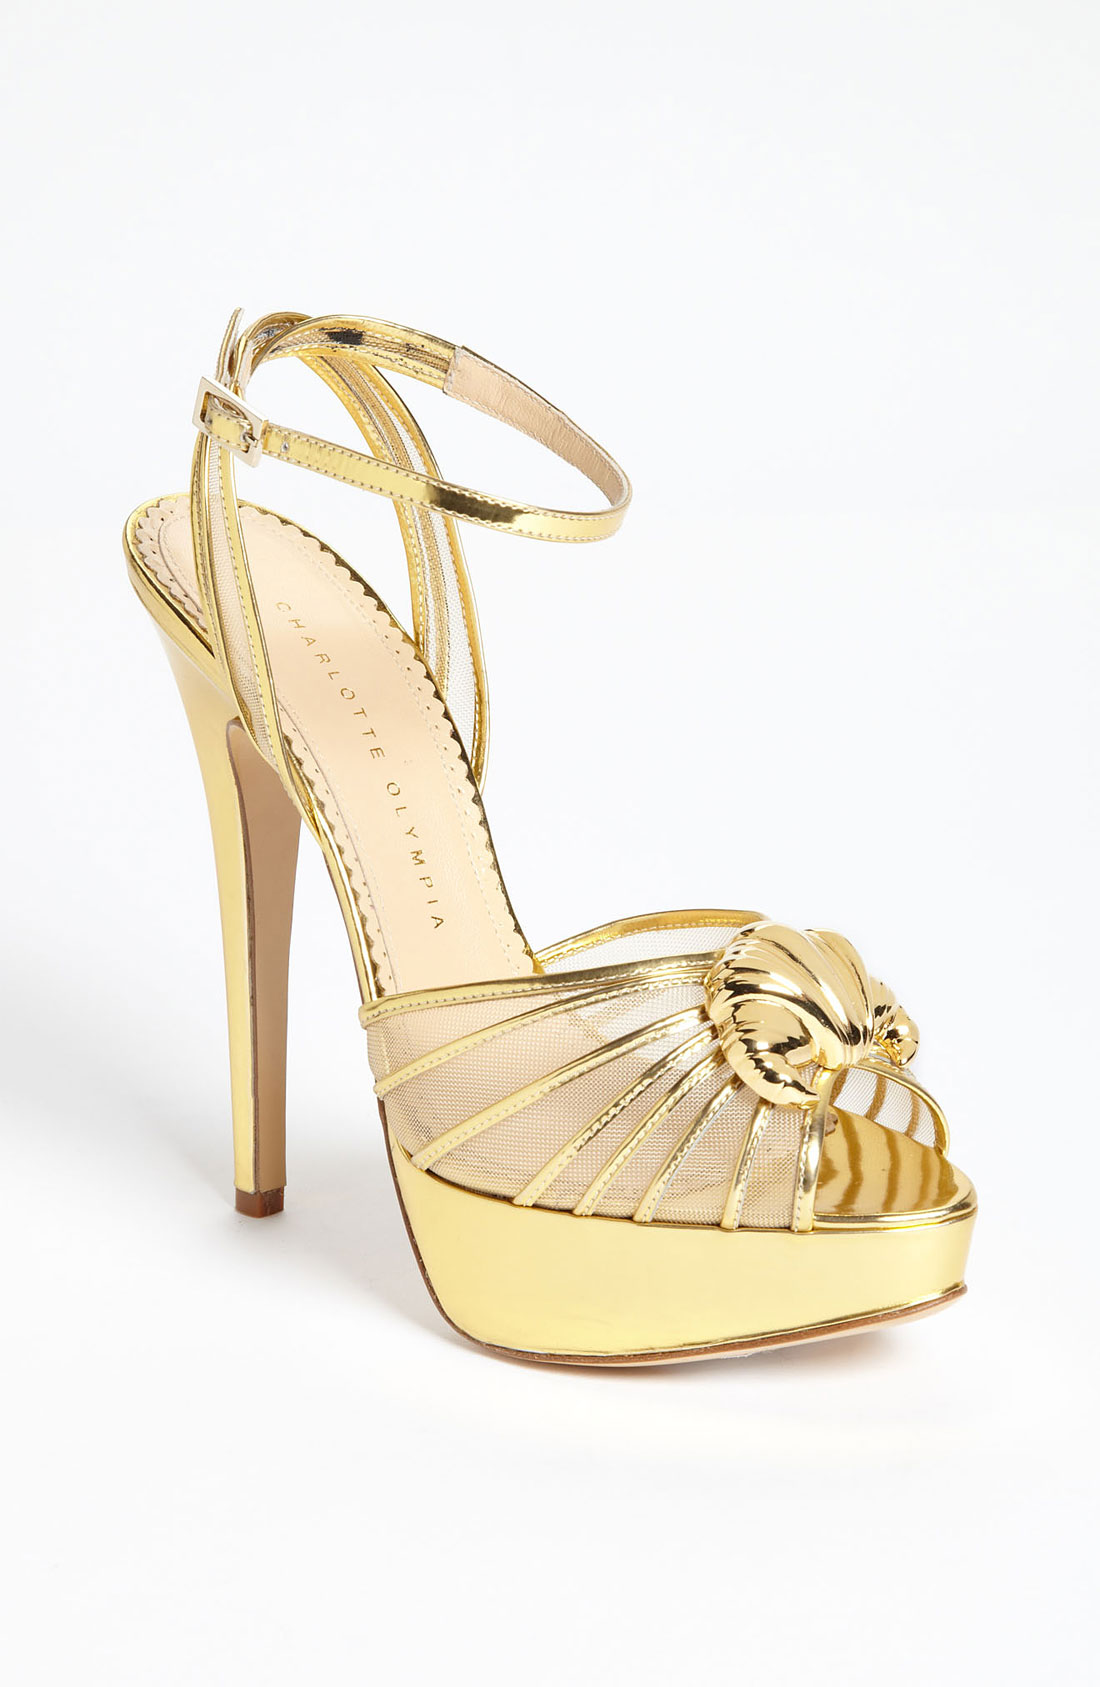 Charlotte Olympia Croissant sandals in gold